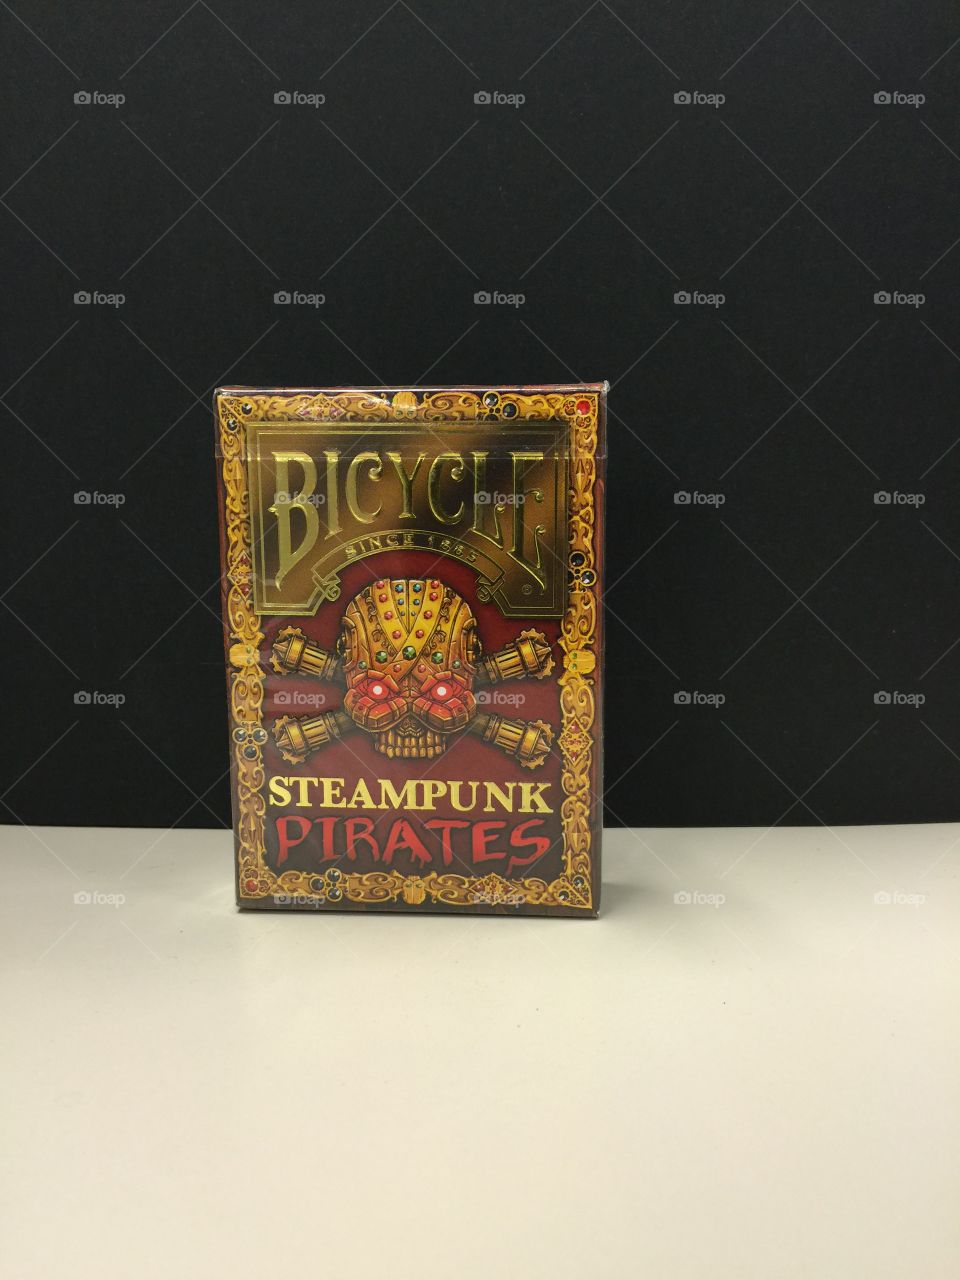 Steampunk Pirates Bicycle Cards exclusive to Kickstarter backers. Front